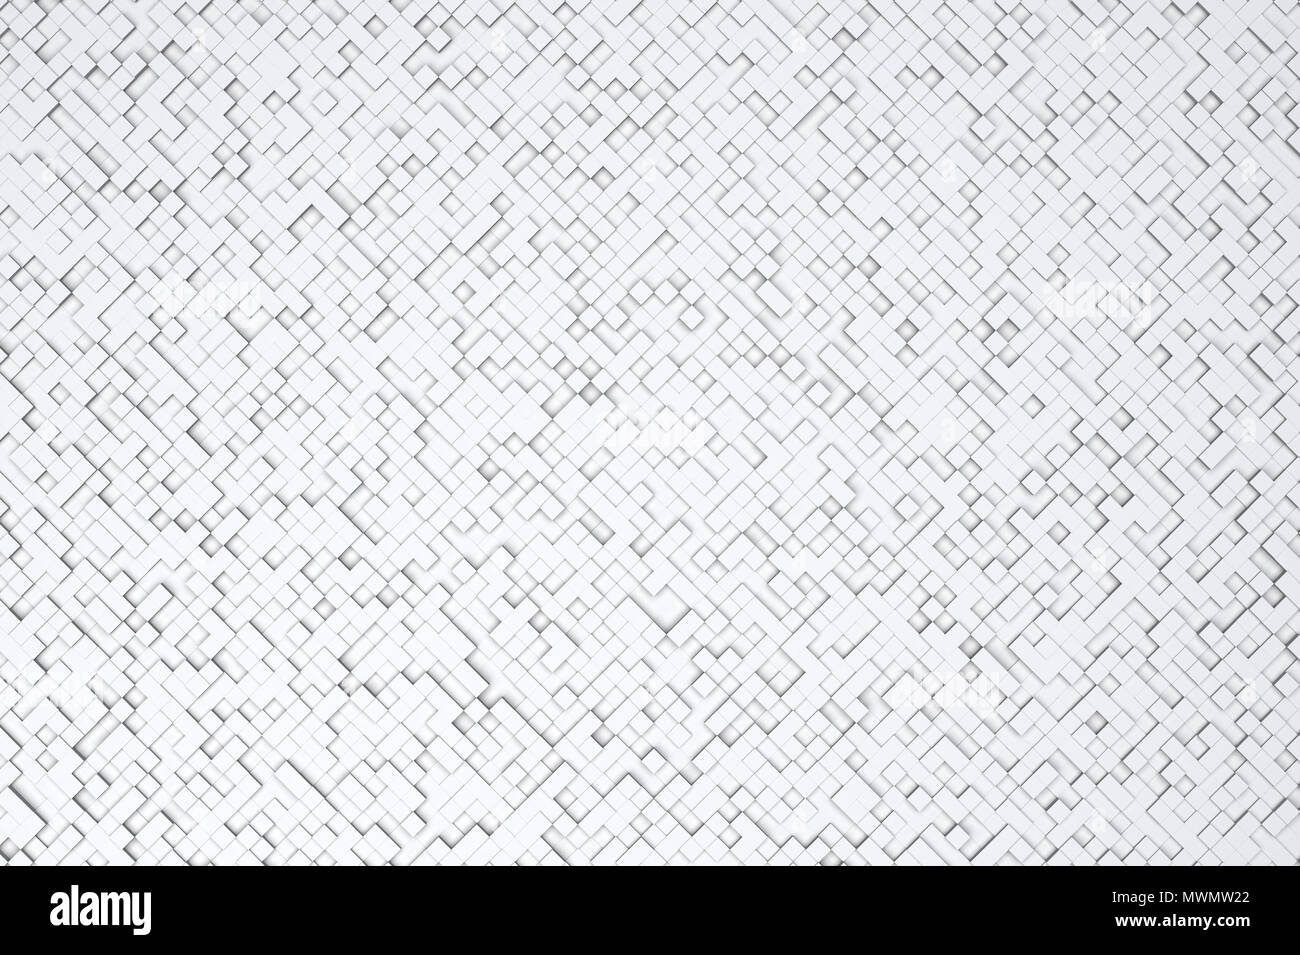 Abstract Diagonal White or Gray 3d Geometric Small Cube Tiles Background Design Pattern Stock Photo